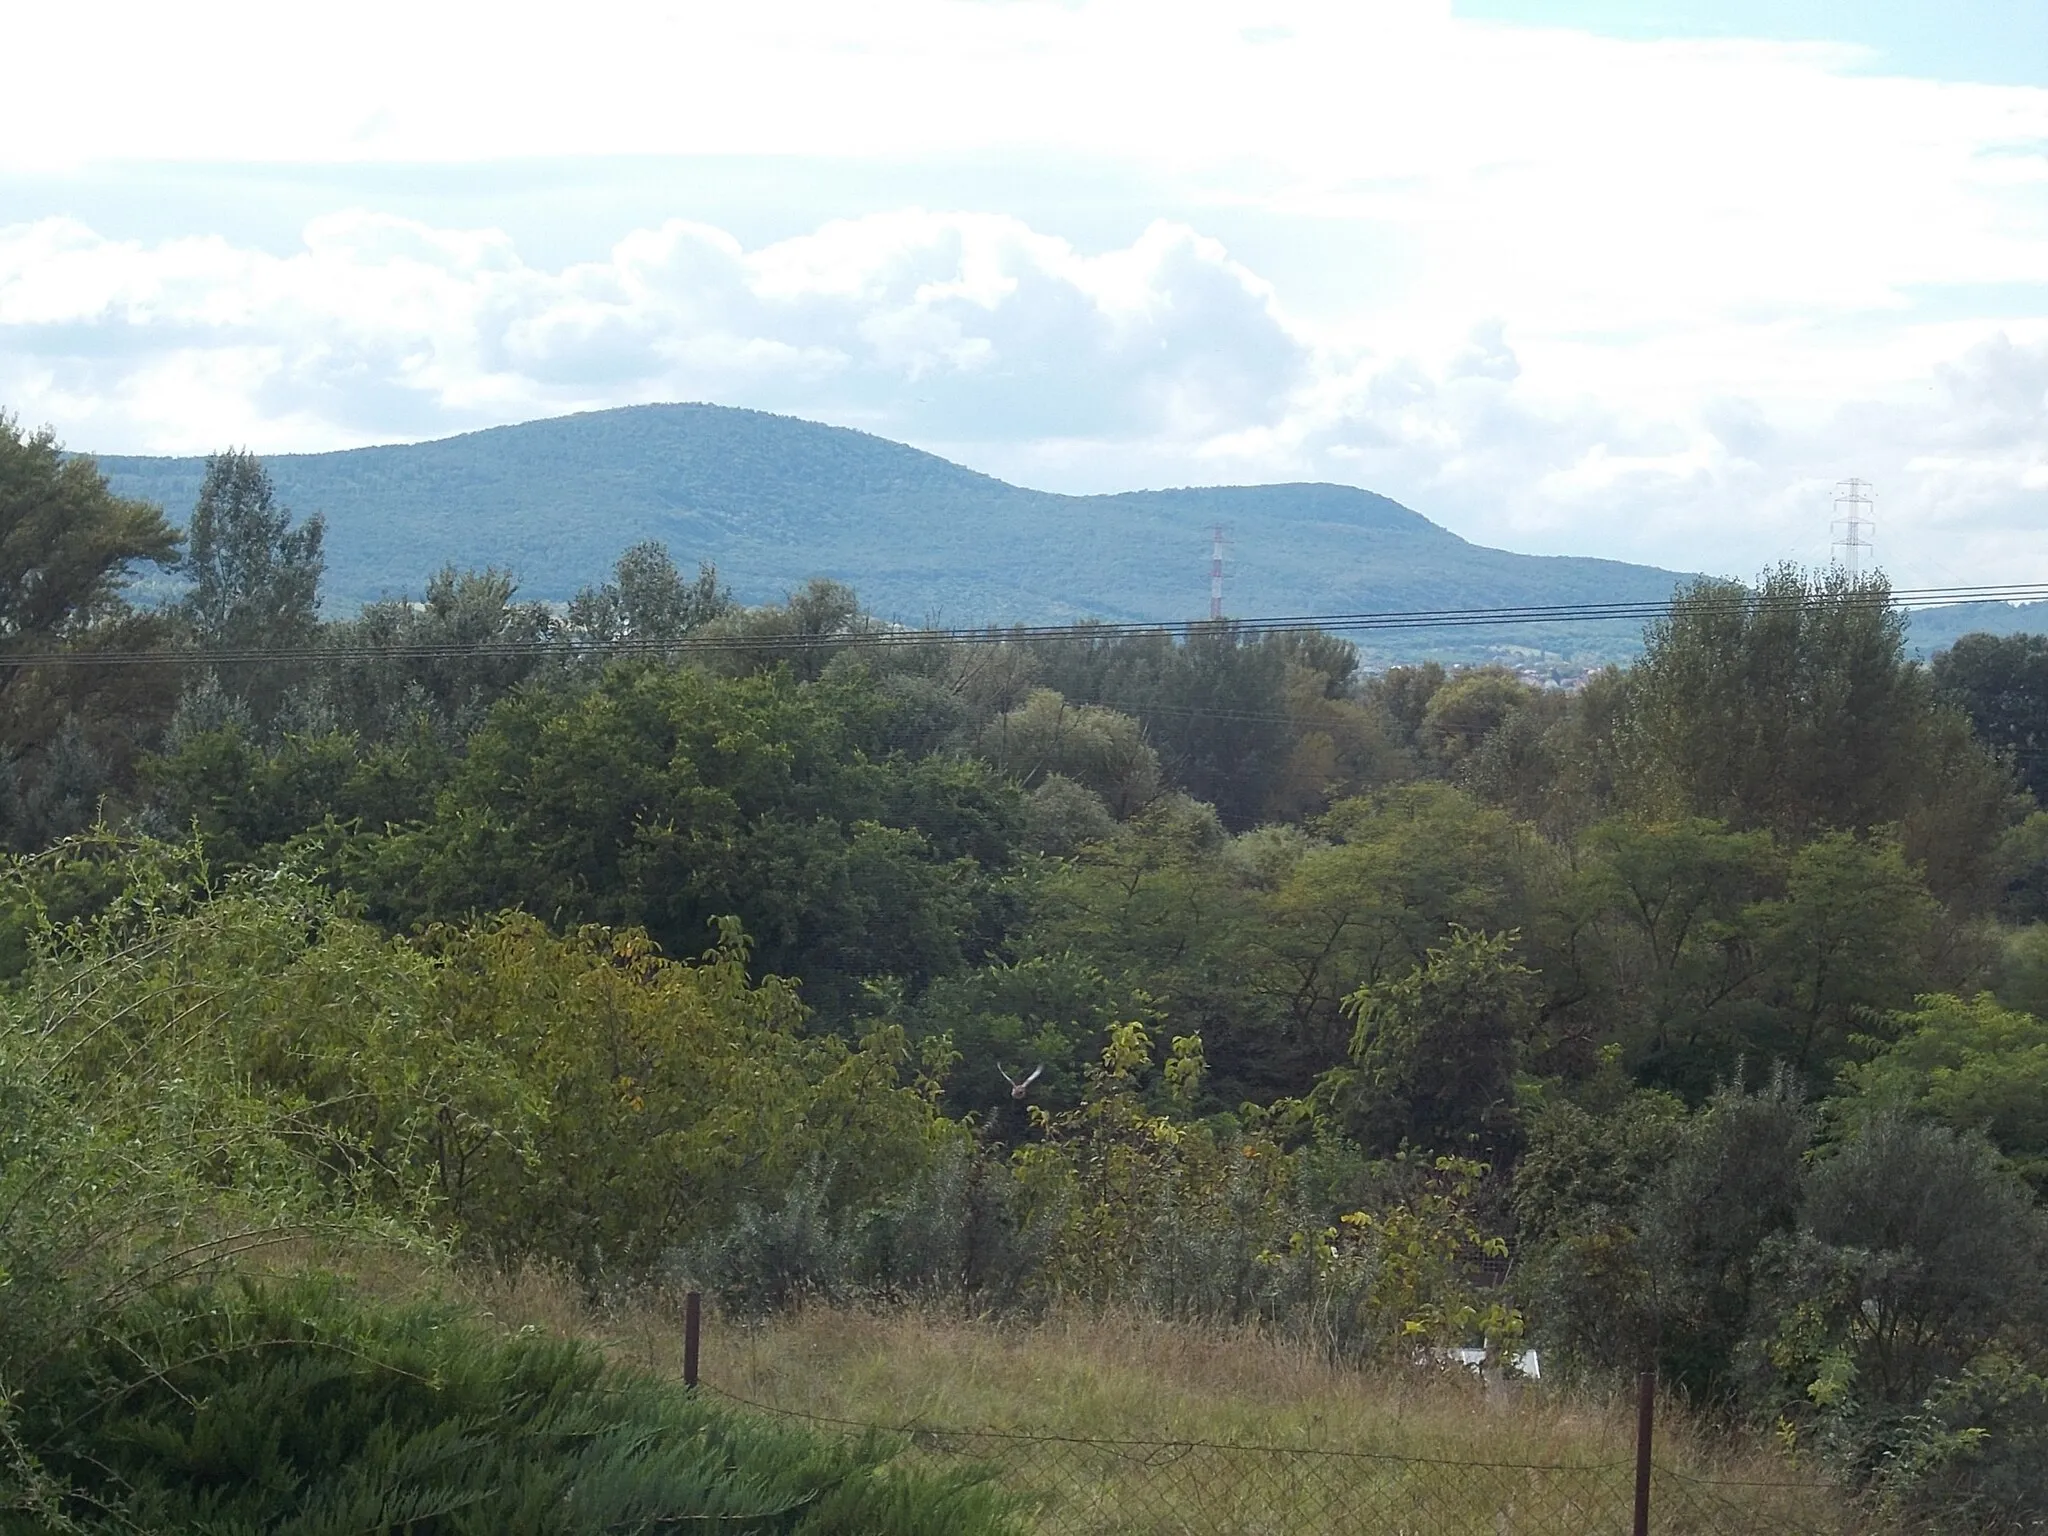 Photo showing: : Pilis Mountains from cemetery - Dunakeszi, Pest County, Hungary.